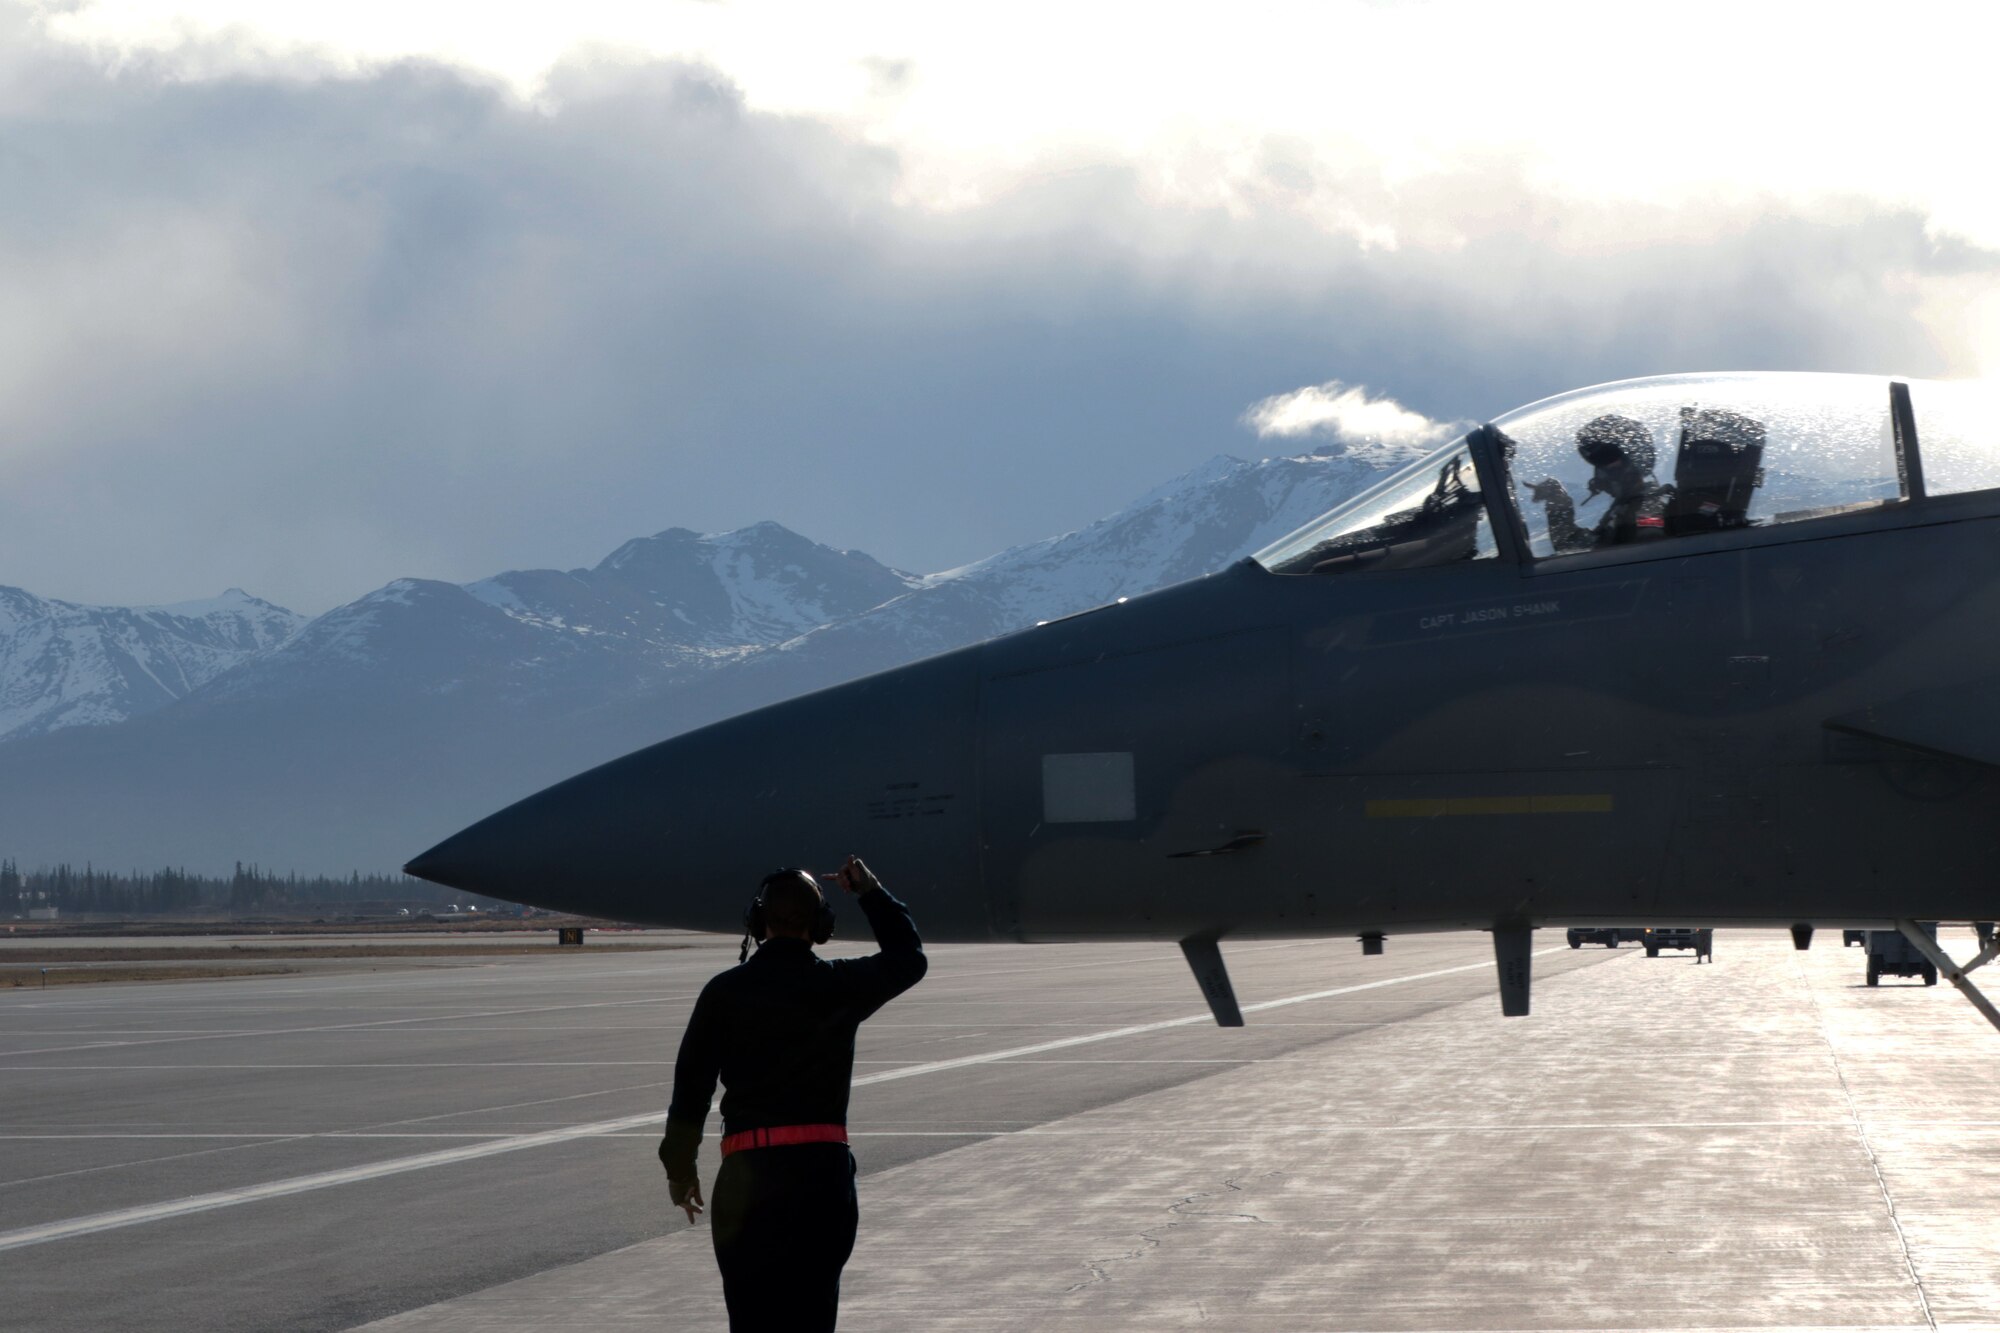 Senior Airman Mitchell Donovan, a crew chief with the 67th Fighter Squadron out of Kadena Airbase motions to pilot Air Force Capt. Jason Shank to roll his F-15C Eagle forward during the morning "Go" May 3 as part of Exercise Northern Edge 17. Exercise NE17 is a joint exercise utilizing Alaska's massive range area and is composed of more than 6,000 service members across all service branches.